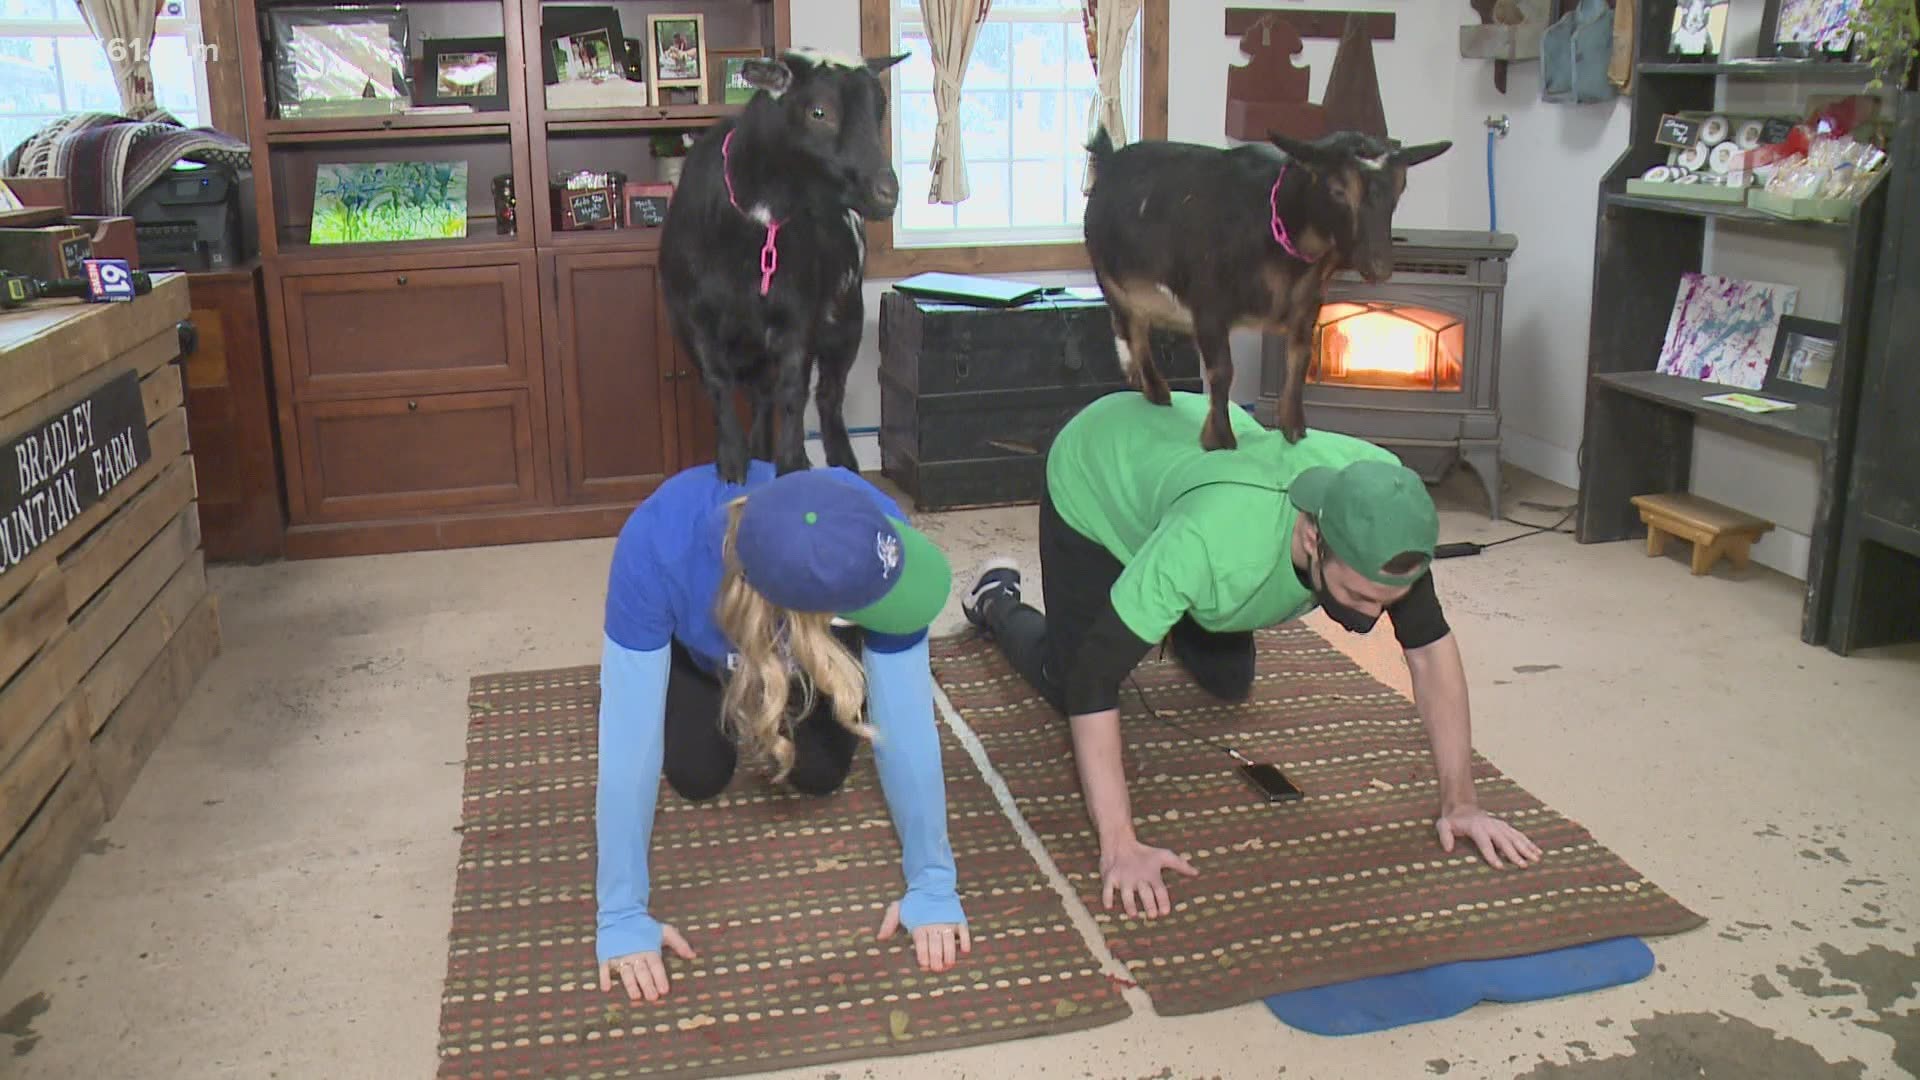 This yoga studio though is a little different from a traditional studio, it’s a farm filled with four-legged friends.